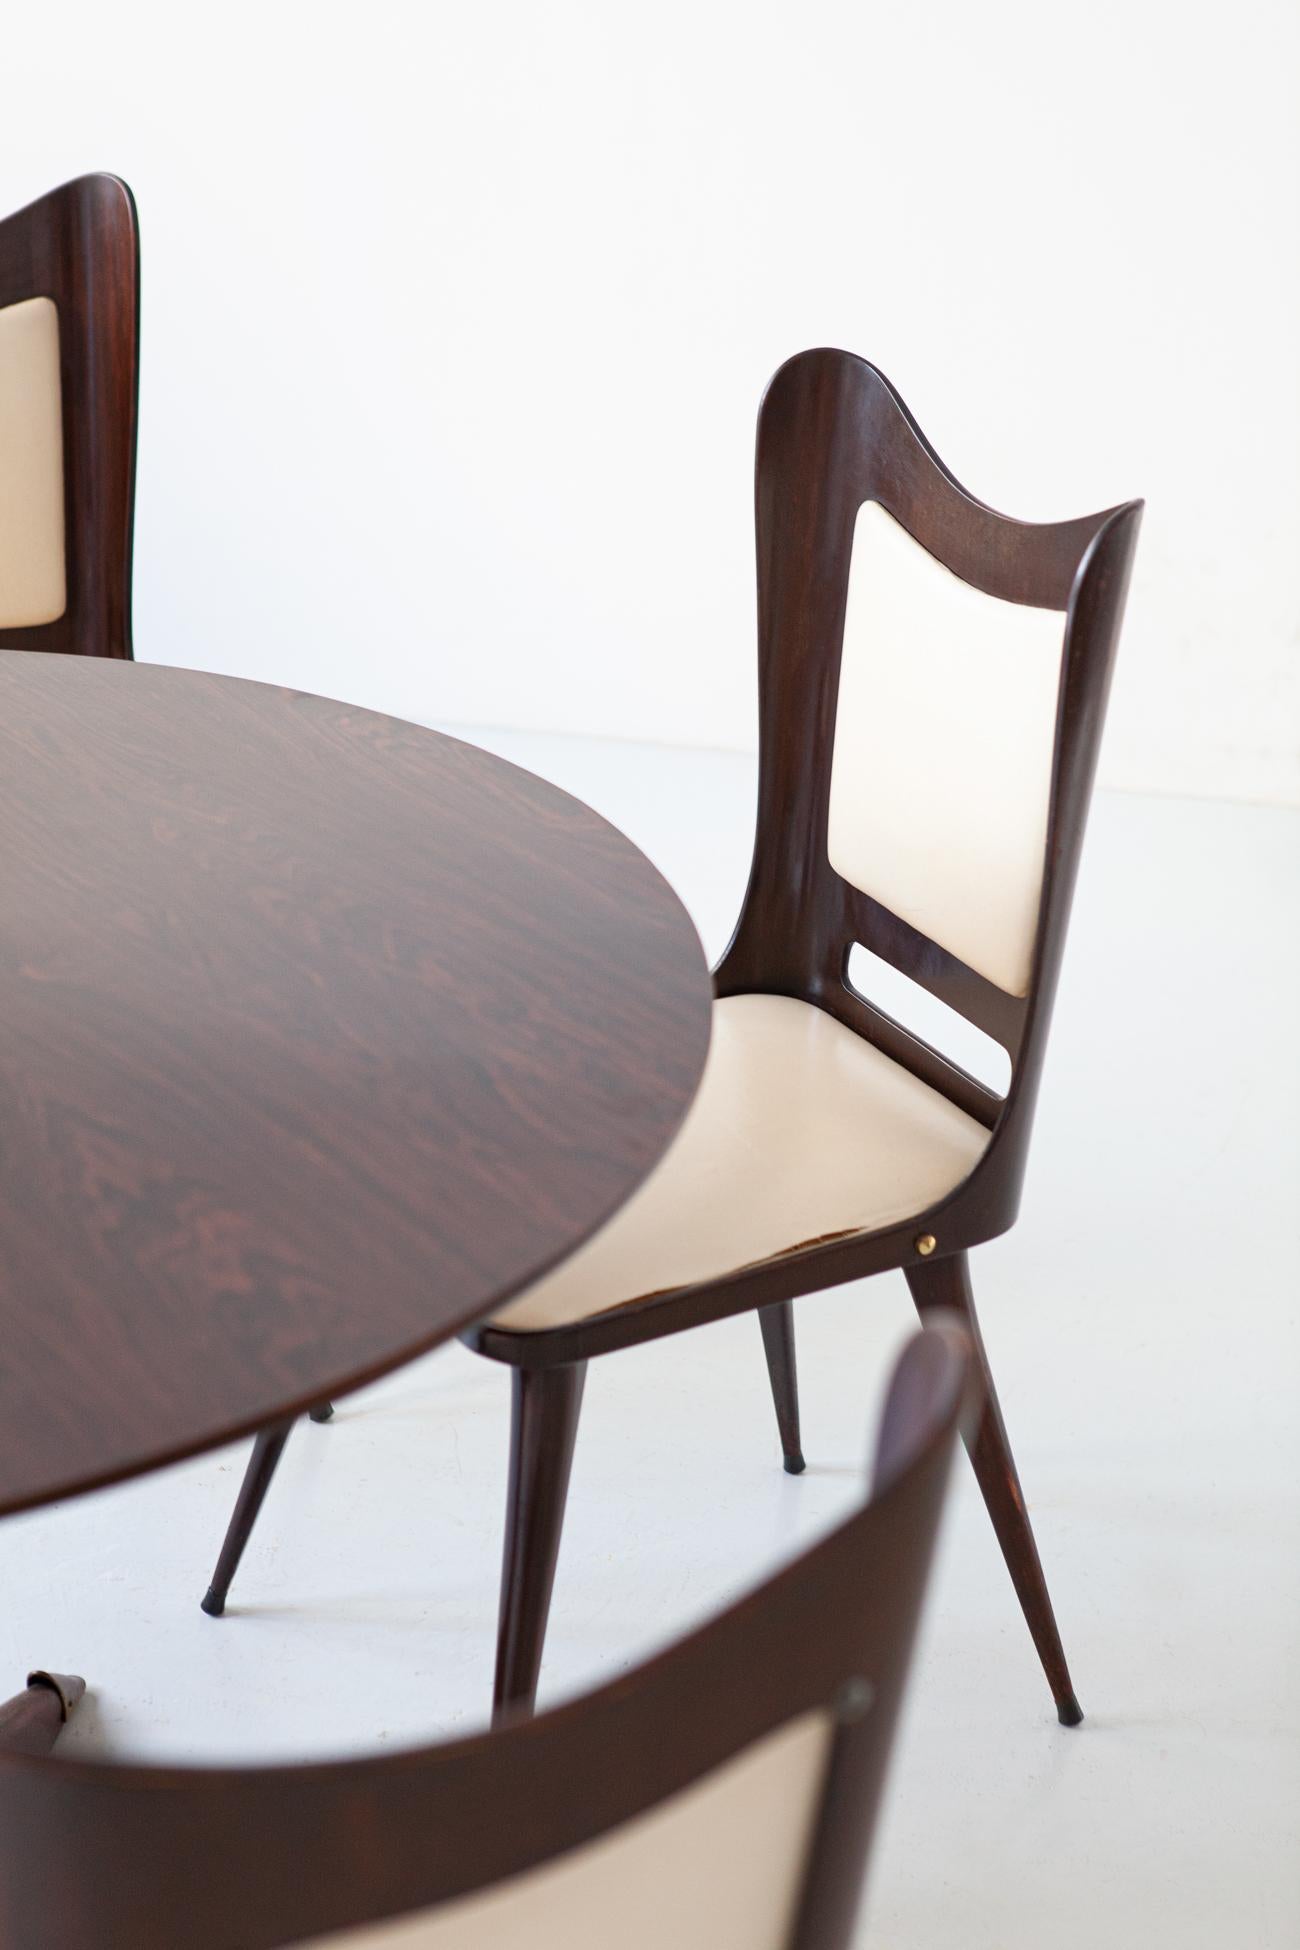 Italian Round Wooden Dining Table with 4 Chairs Set by Carlo Ratti 2